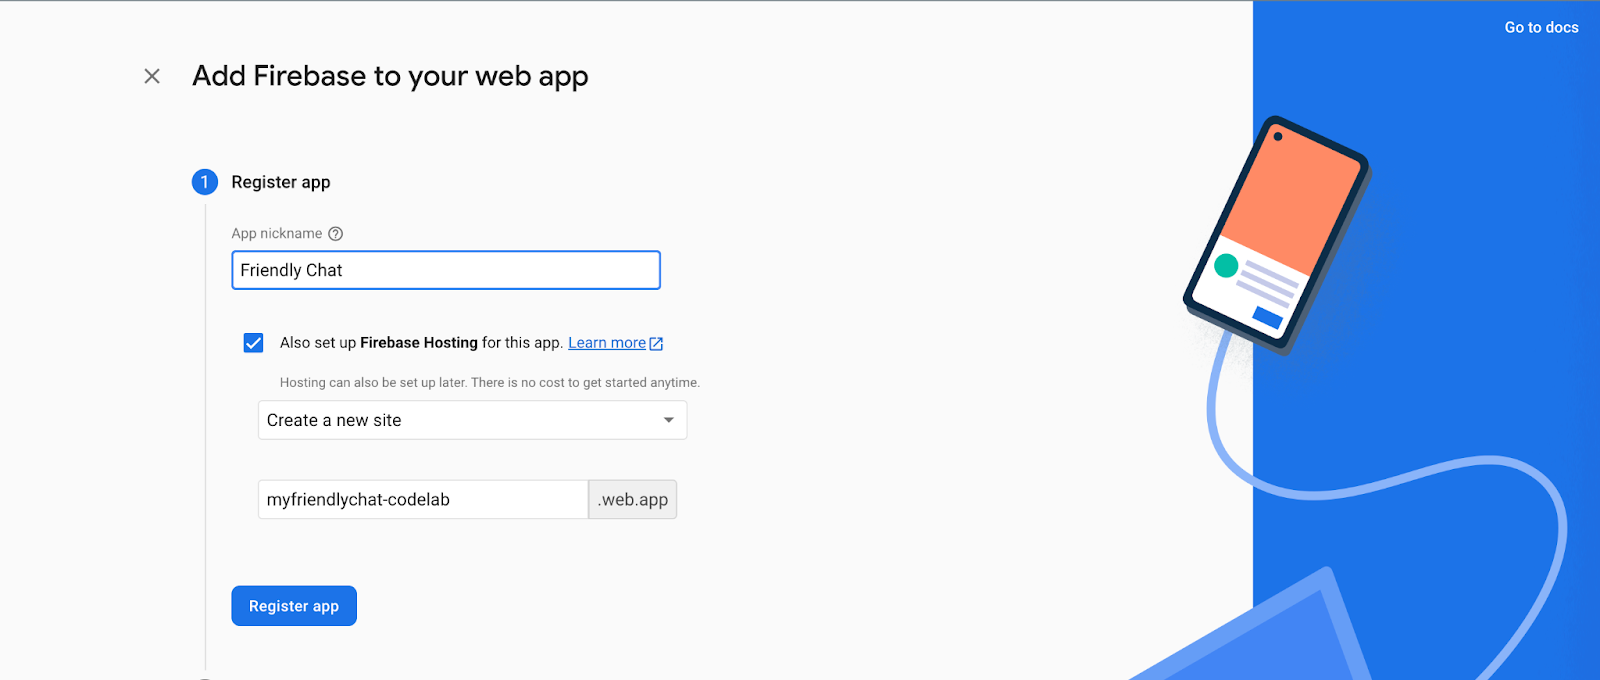 The add Firebase to your web app window